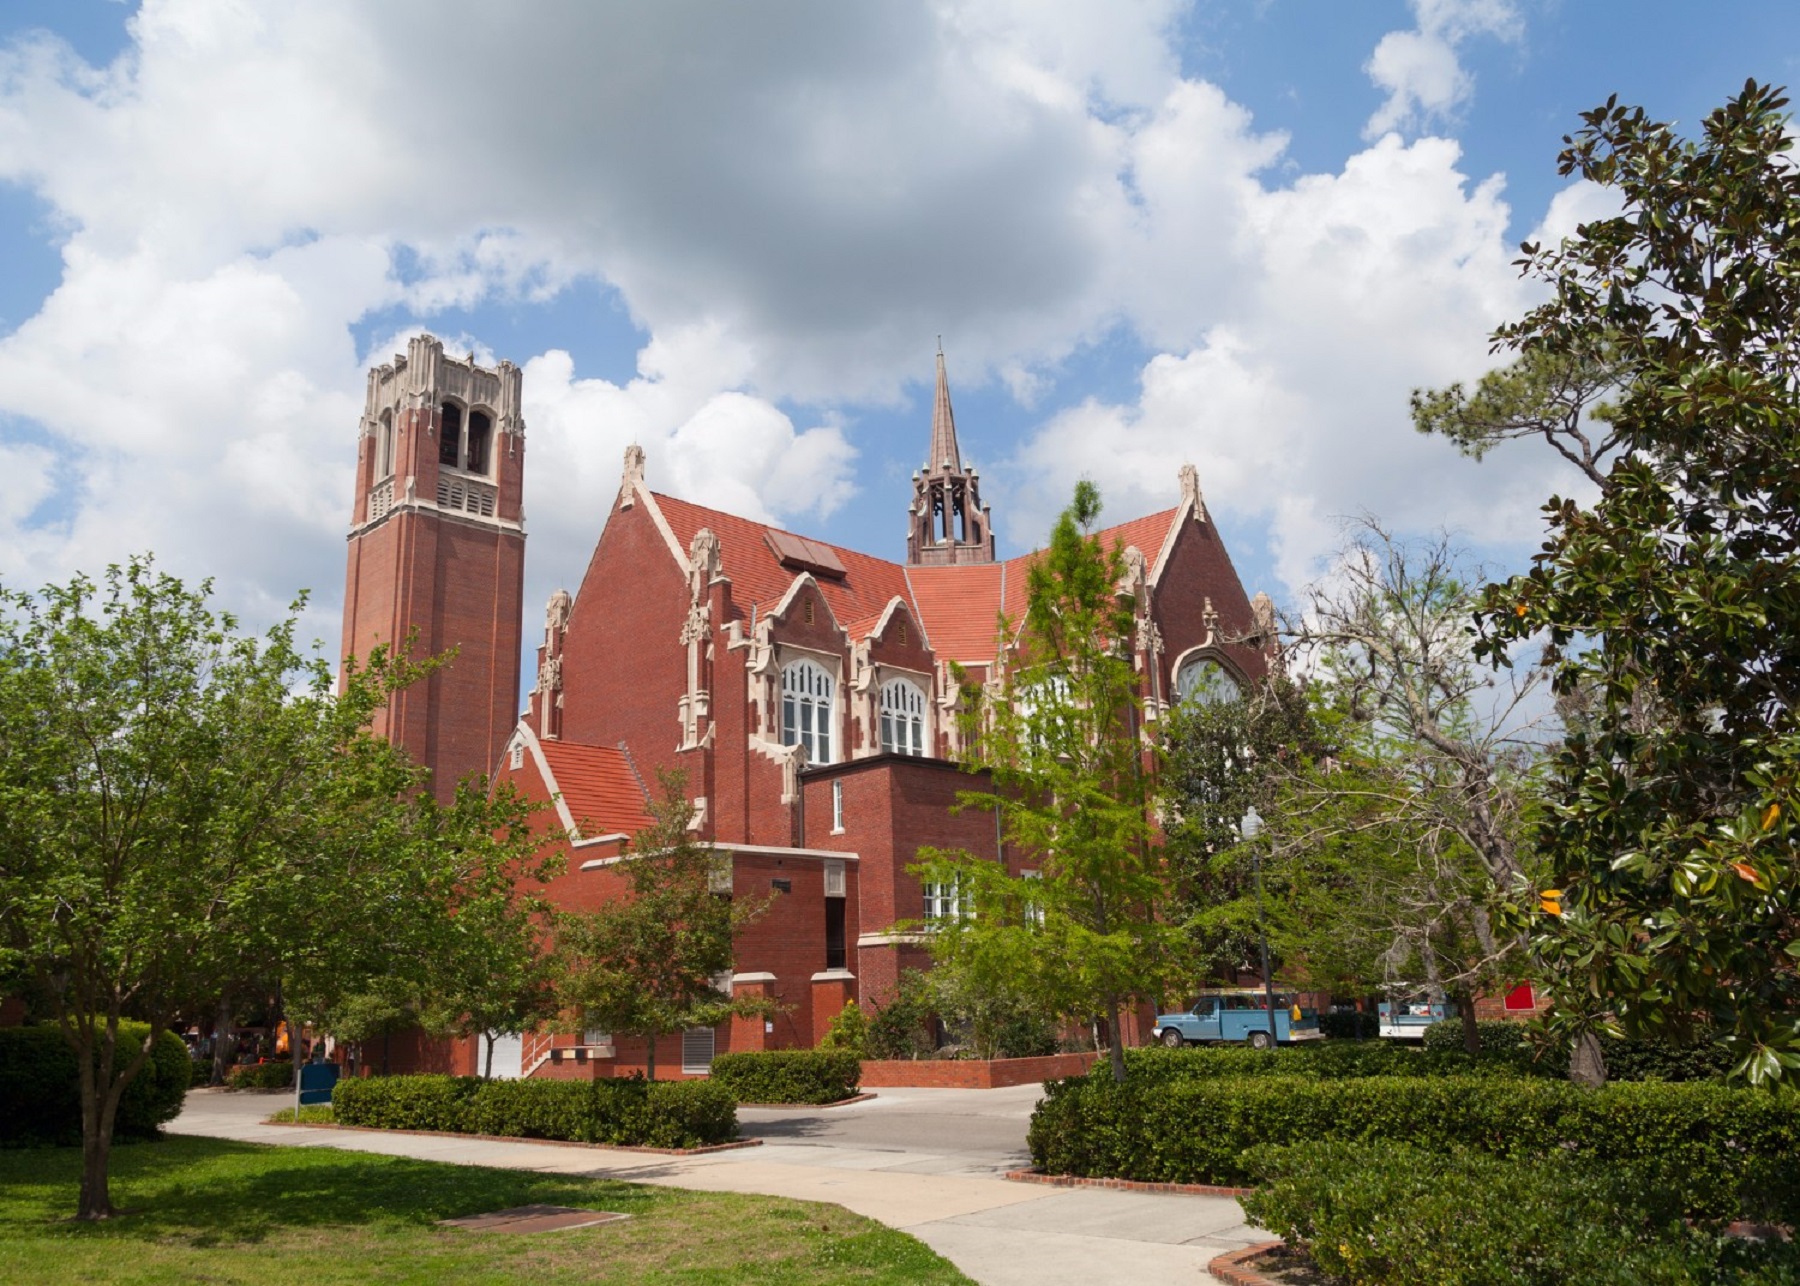 7 Cool Facts About the University of Florida